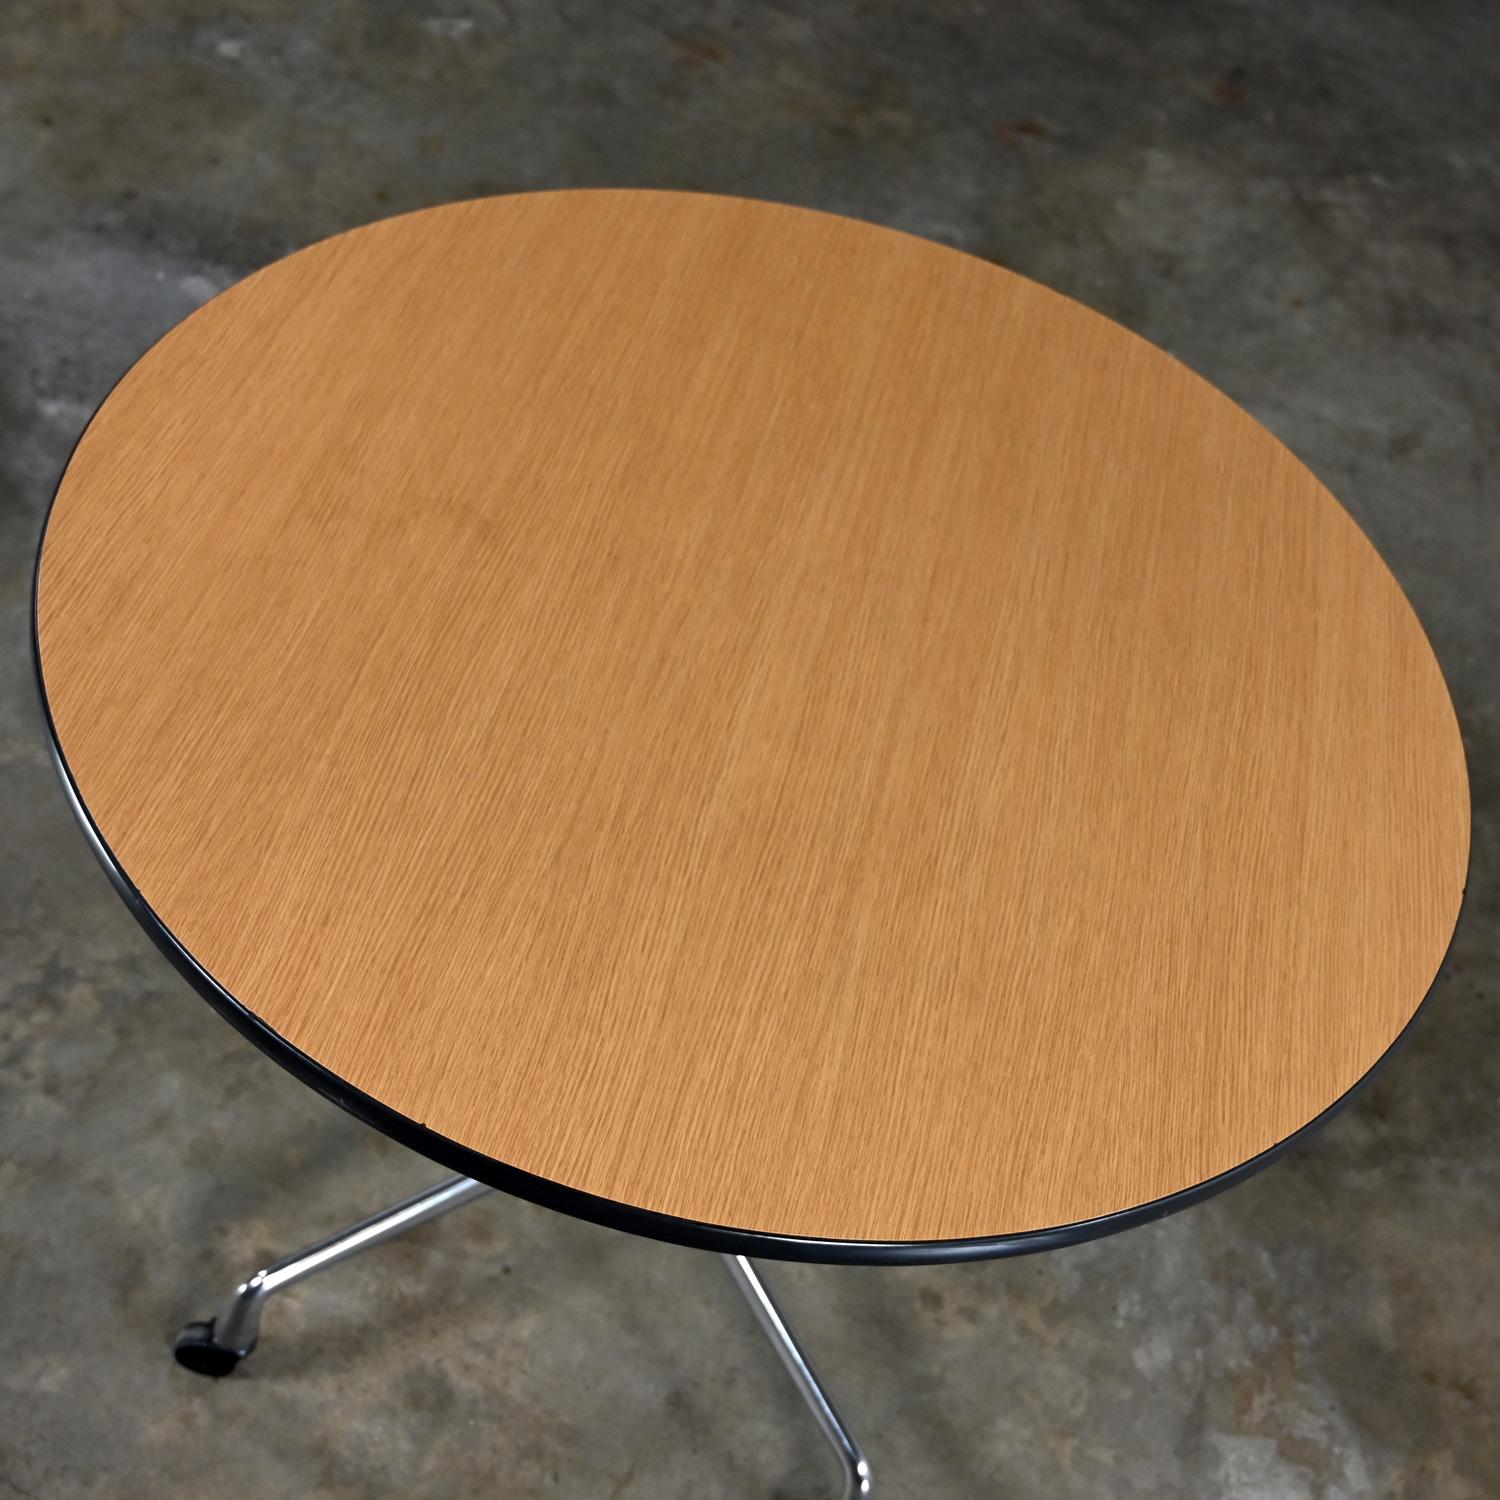 Eames Herman Miller Round Table Universal Base Casters & 36” Blonde Laminate Top For Sale 1